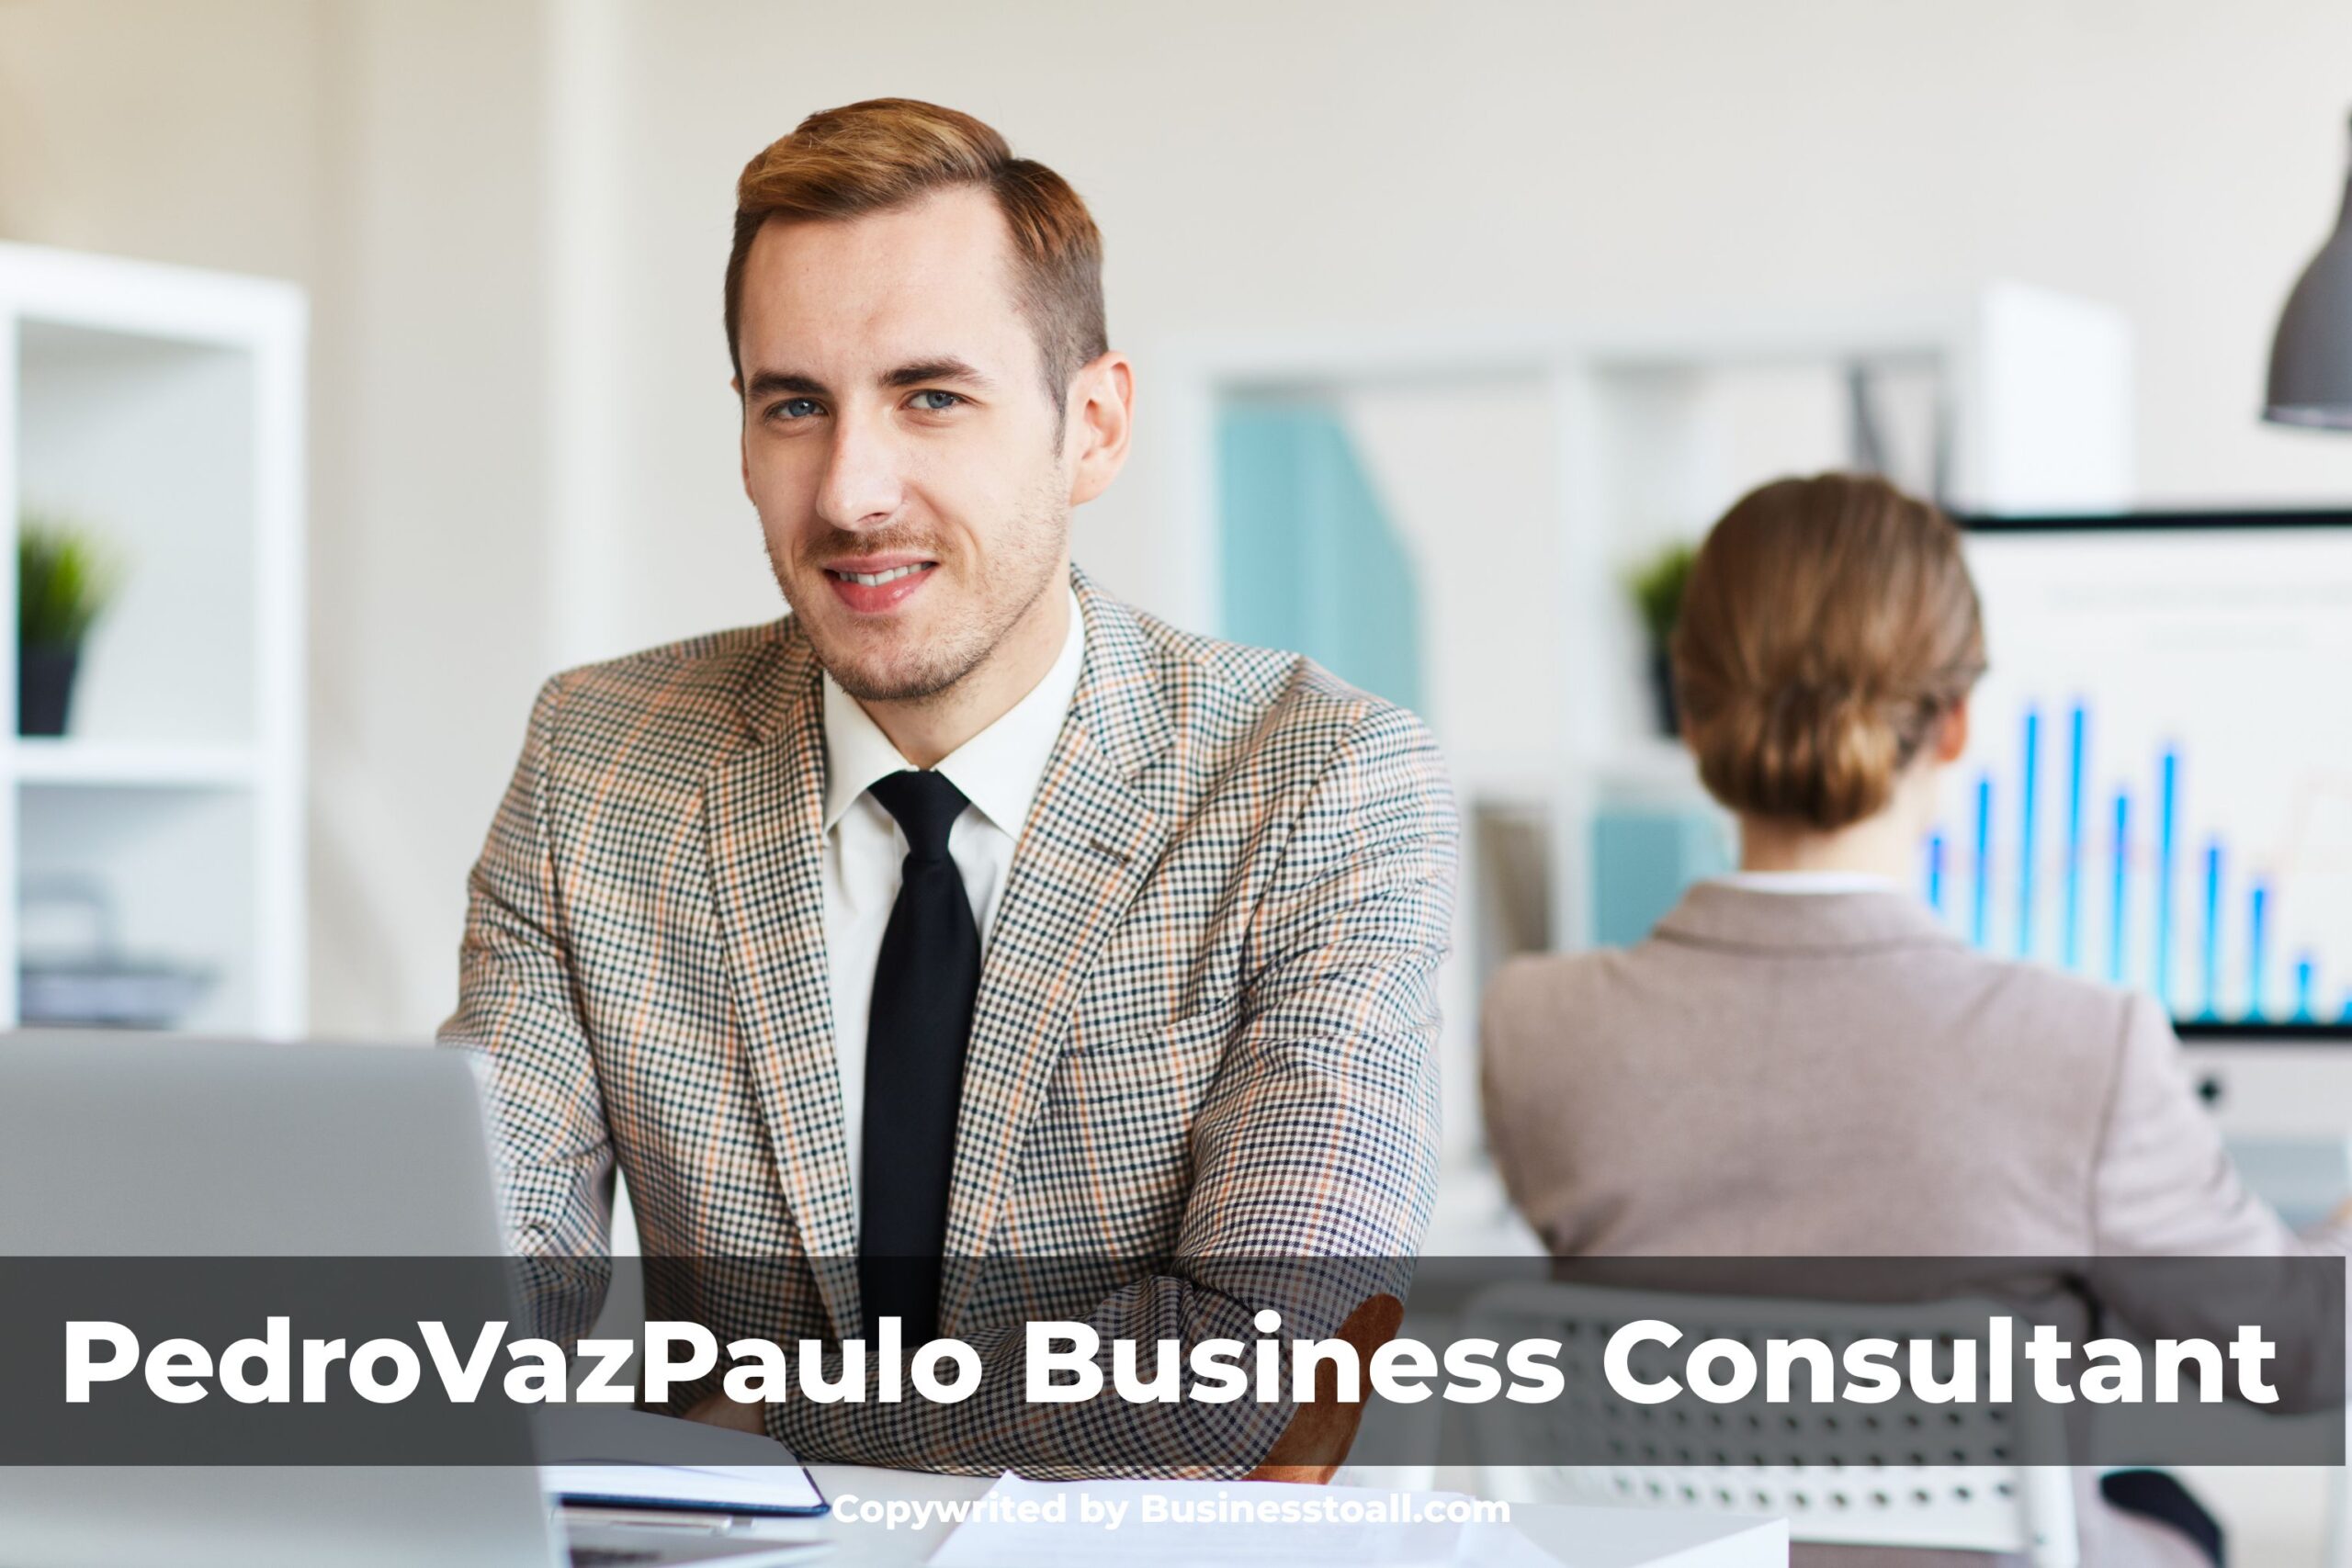 Pedro Vaz Paulo: A Leading Business Consultant